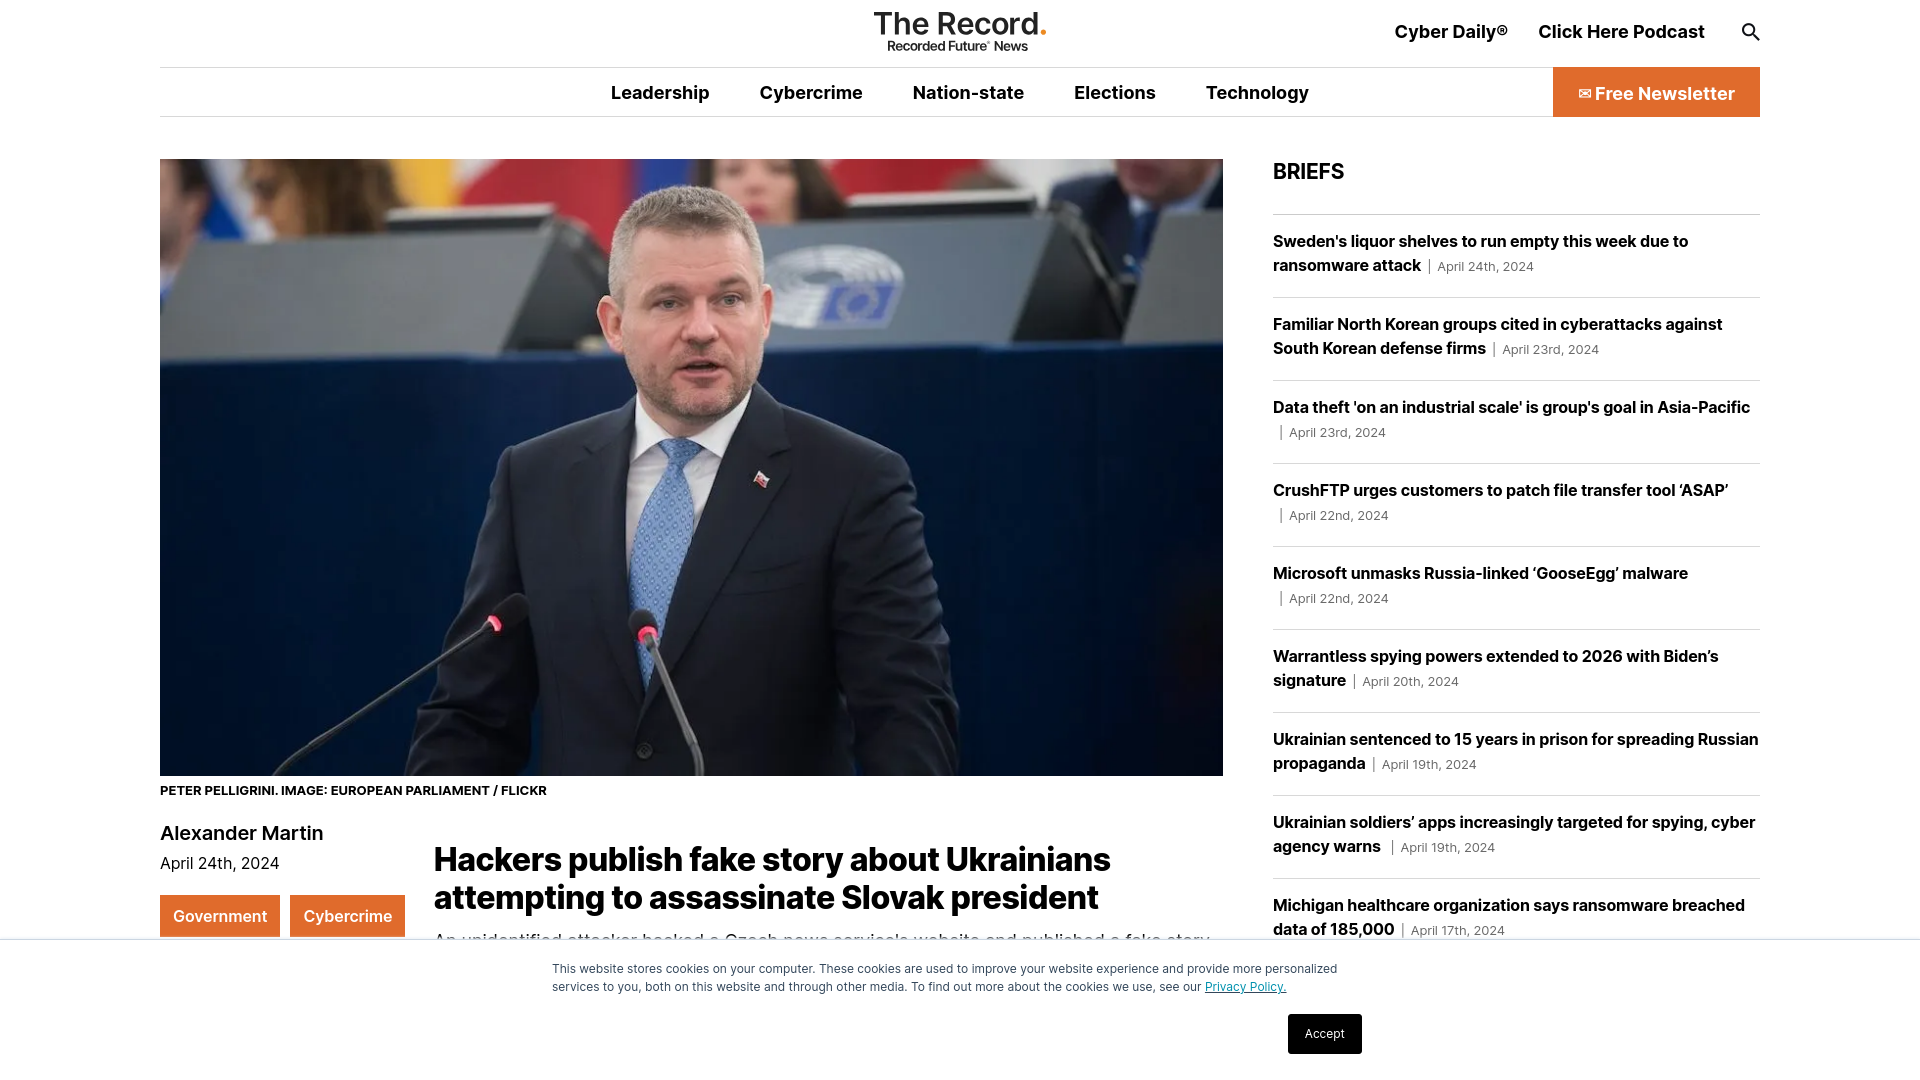 Hackers publish fake story about Ukrainians attempting to assassinate Slovak president